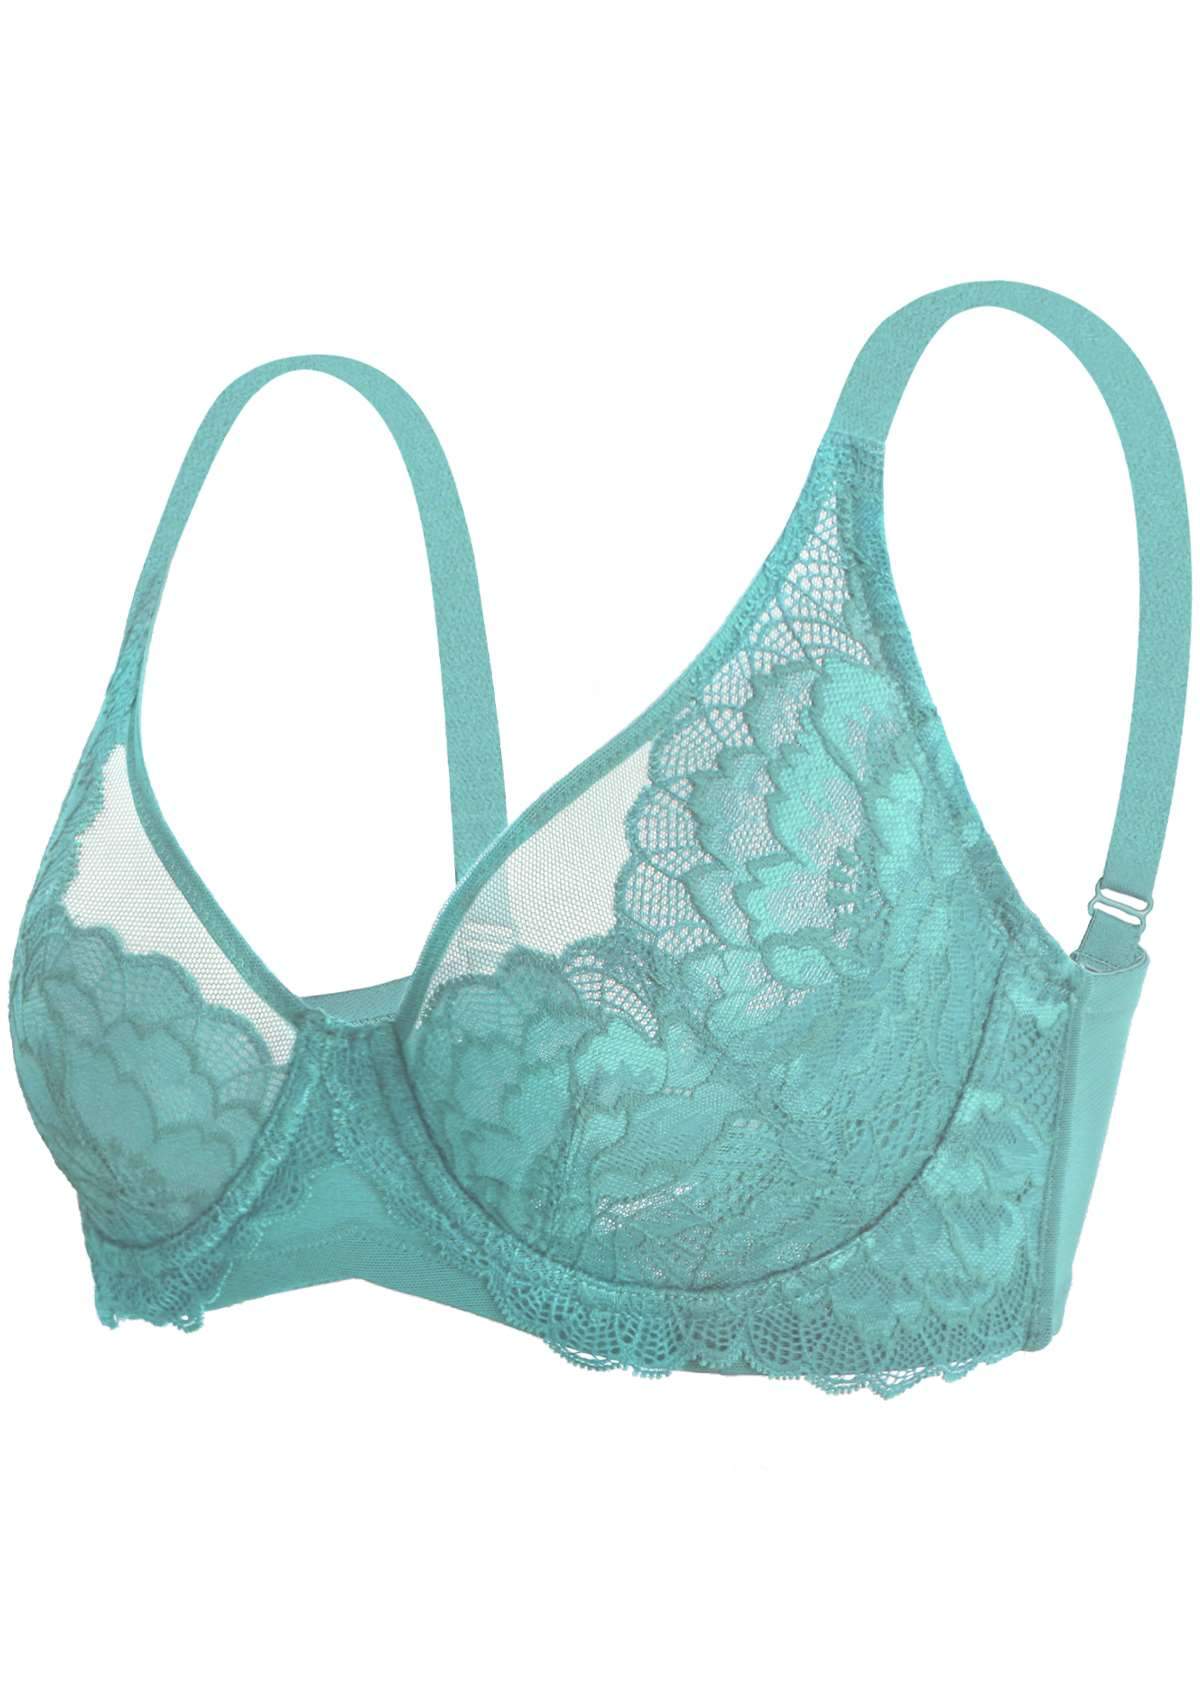 HSIA Paeonia Lace Full Coverage Underwire Non-Padded Uplifting Bra - Dark Blue / 42 / D